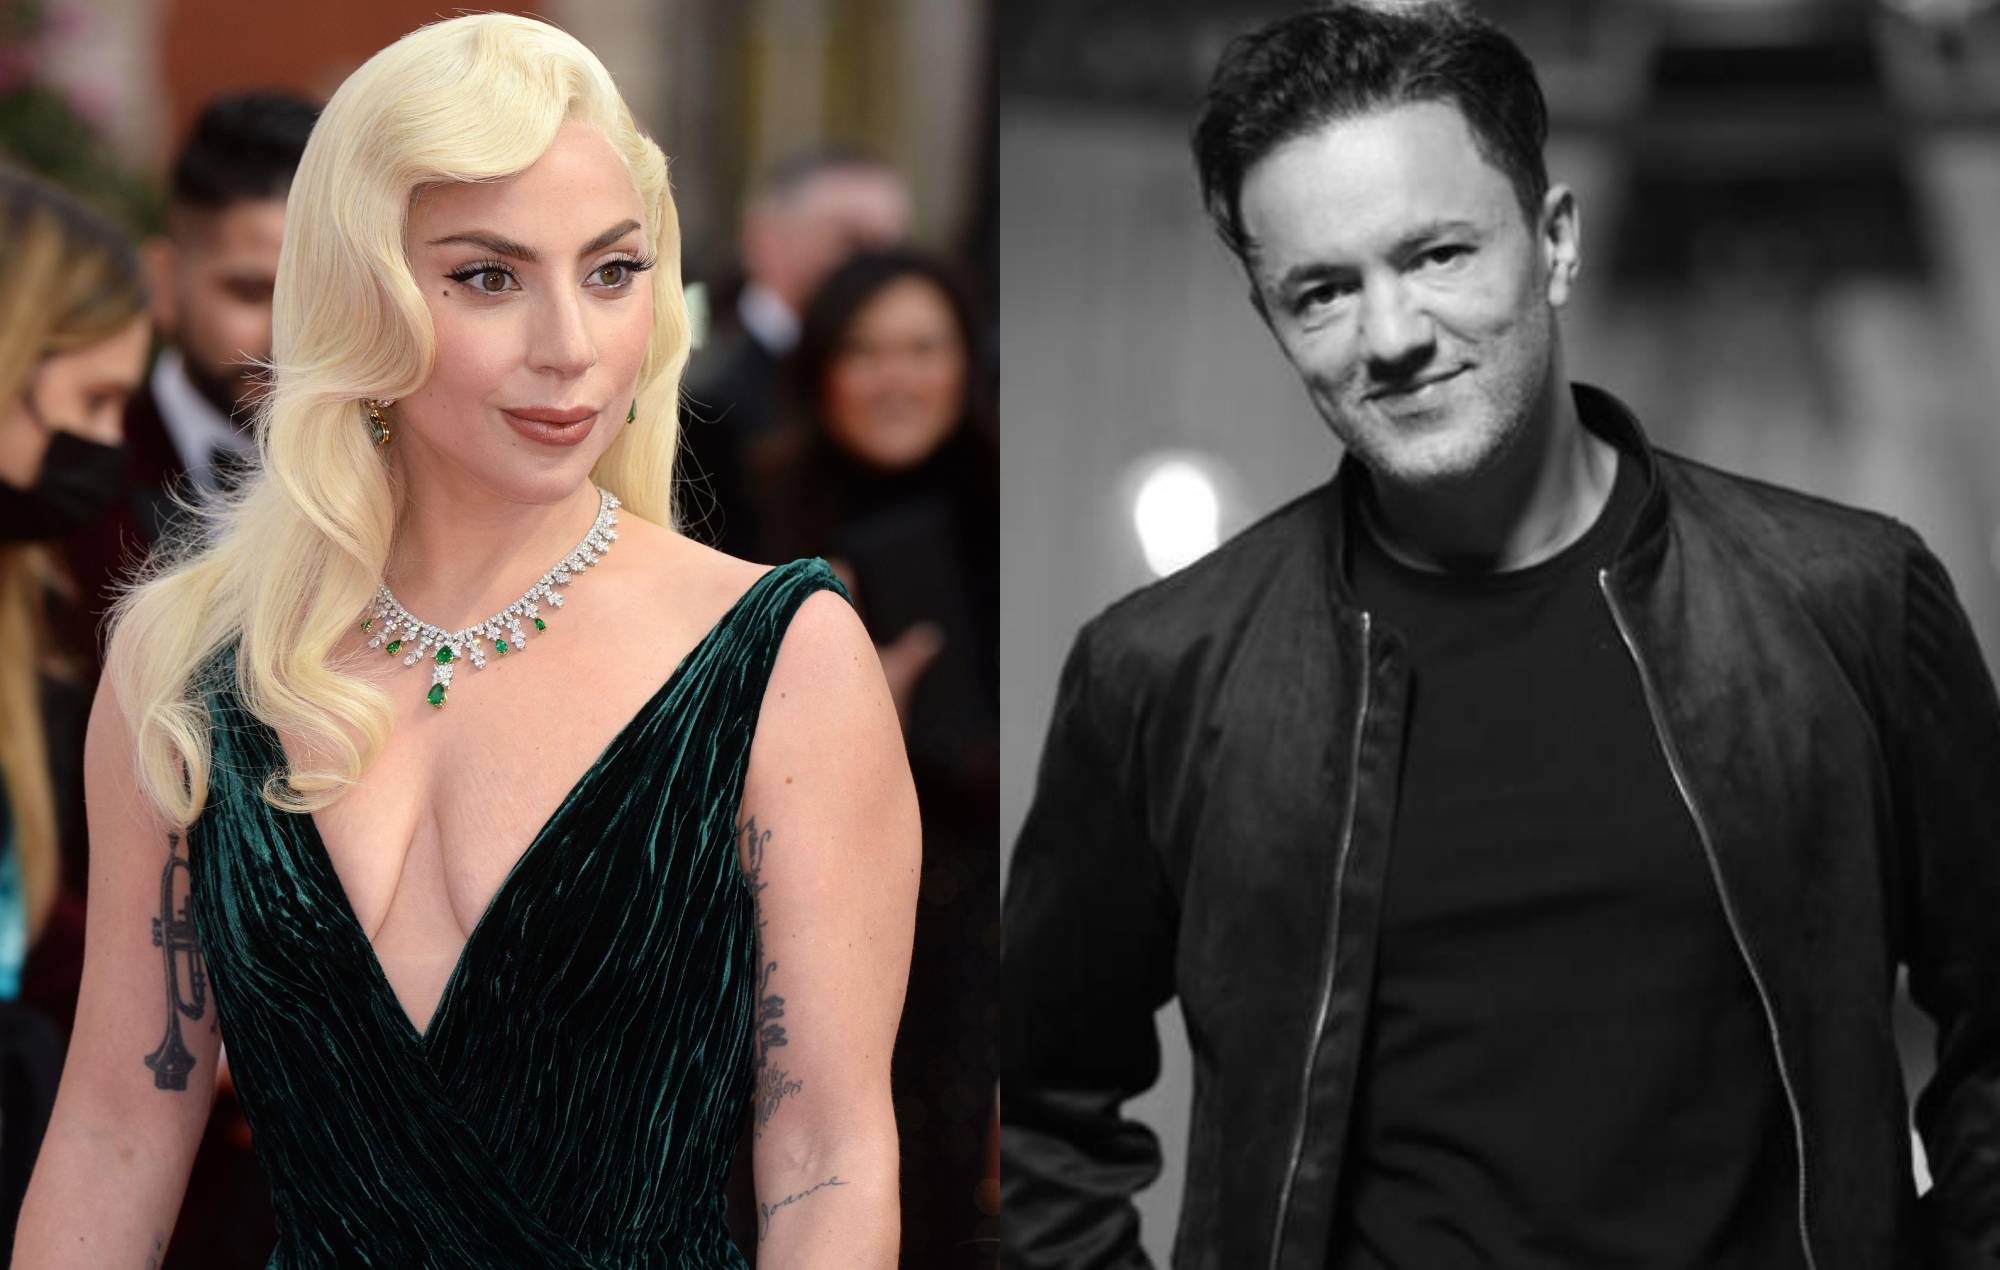 RedOne would be up for working with Lady Gaga again: 'We made history